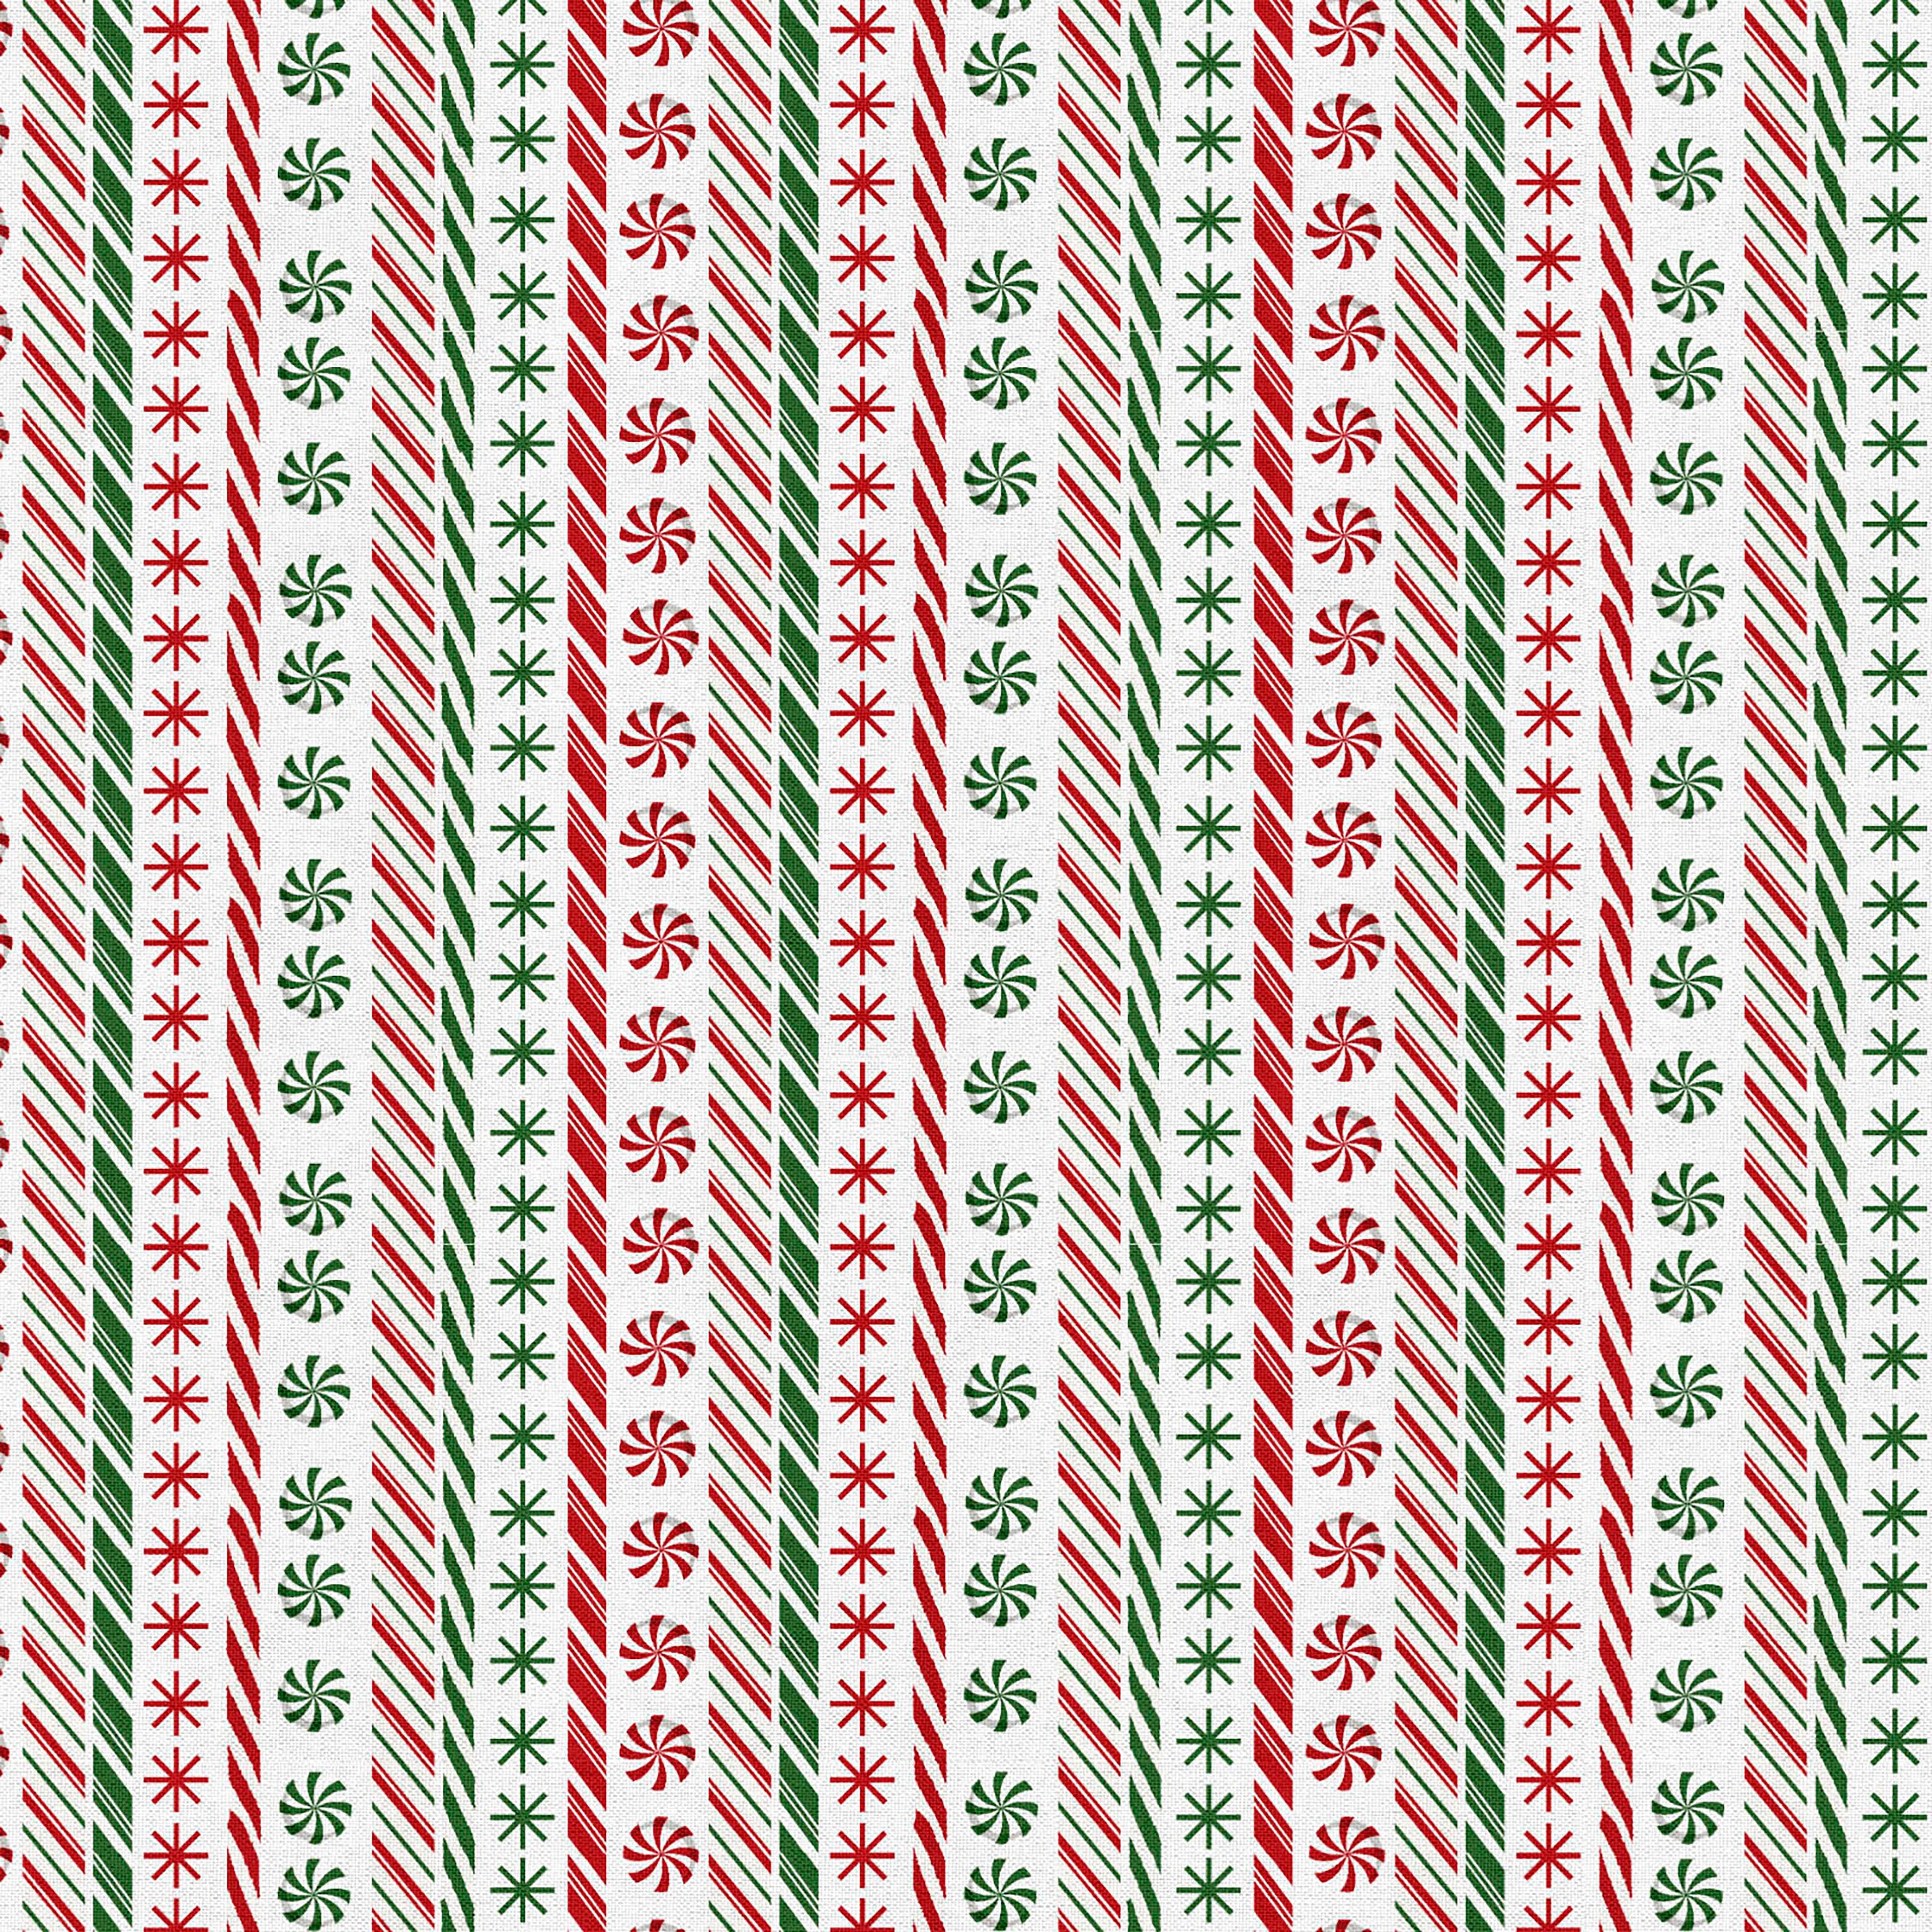 Fabric Editions Peppermint Stripe Cotton Fabric